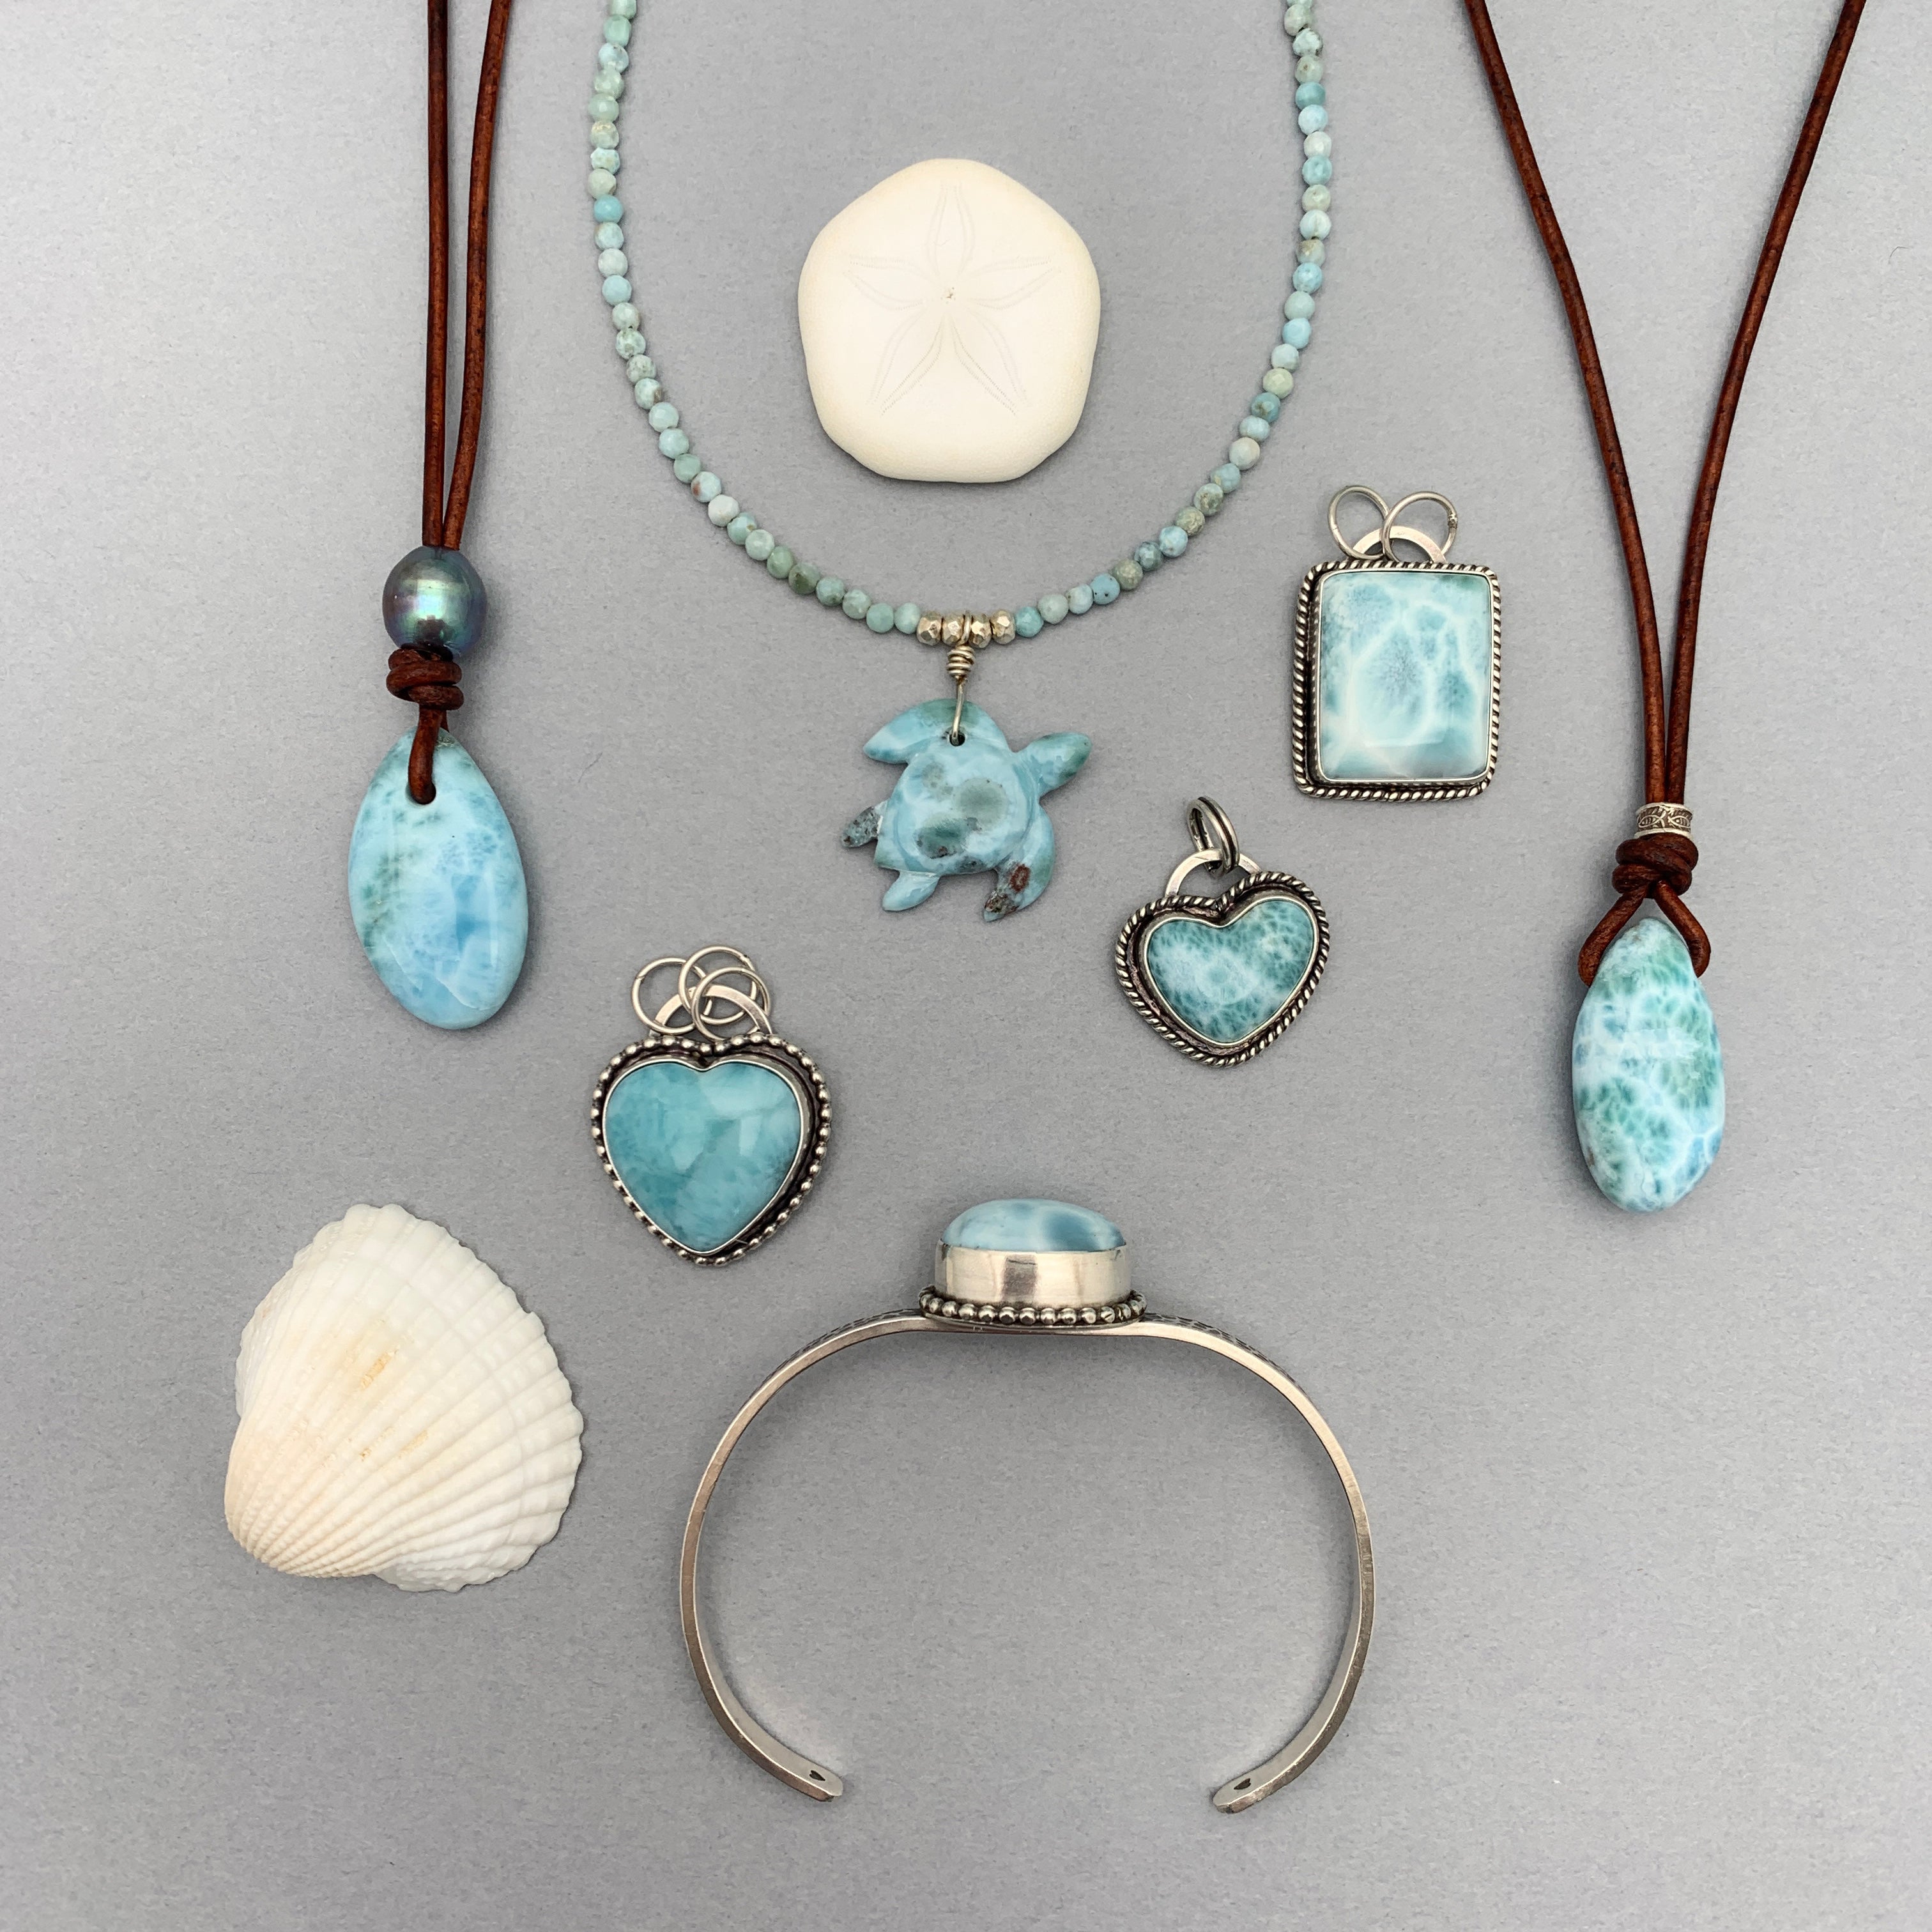 Larimar and sterling silver jewelry, necklaces and cuff bracelet